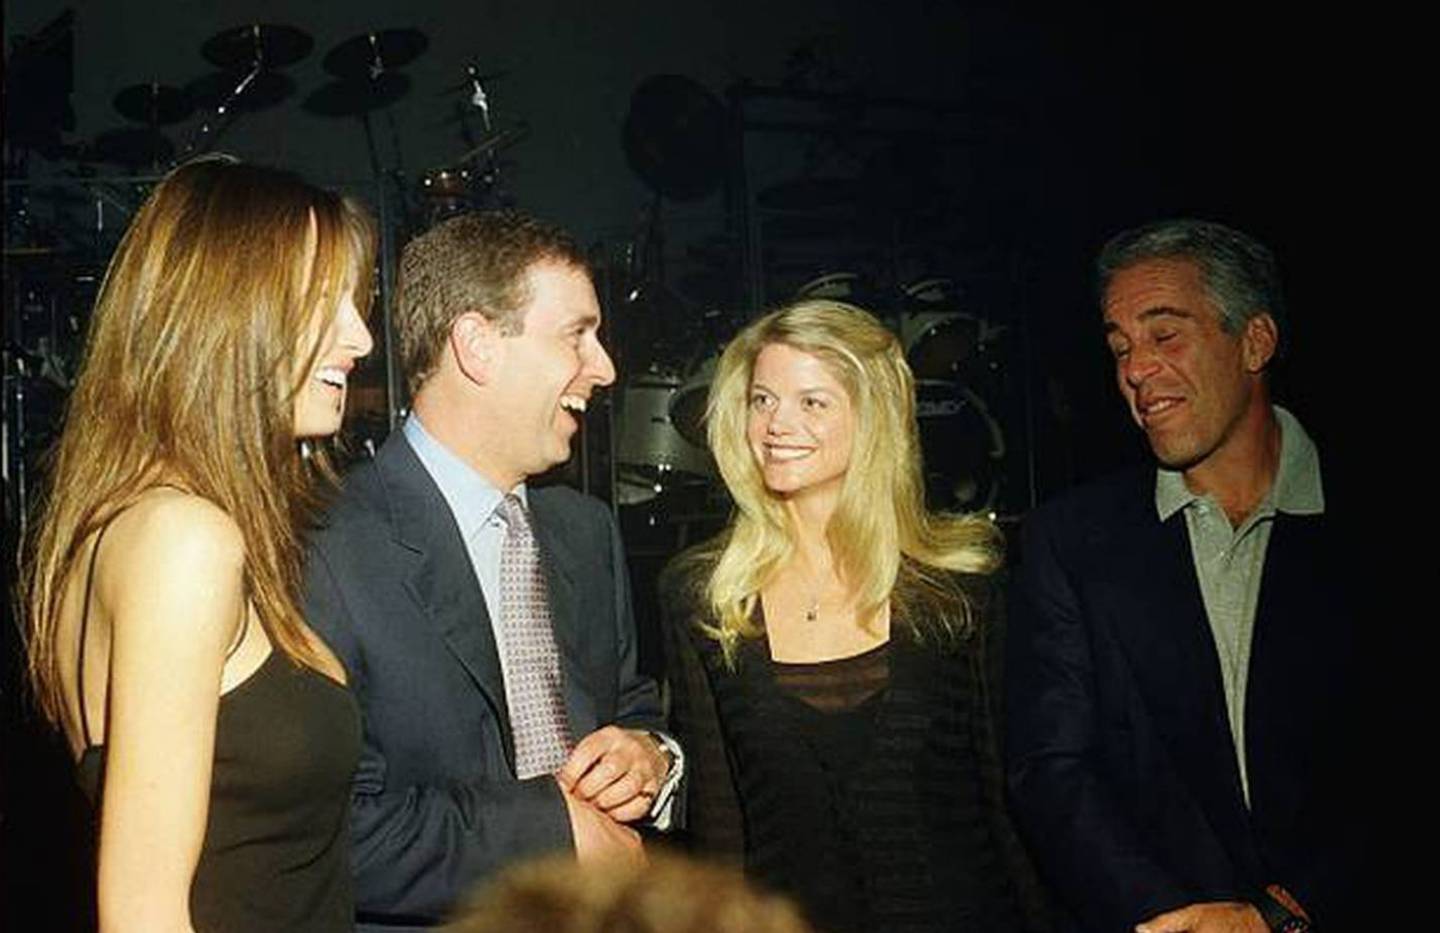 Melania Trump, Prince Andrew, Gwendolyn Beck and Jeffrey Epstein at a party at the Mar-a-Lago club, Palm Beach, Florida, February 12, 2000. Photo / Getty Images